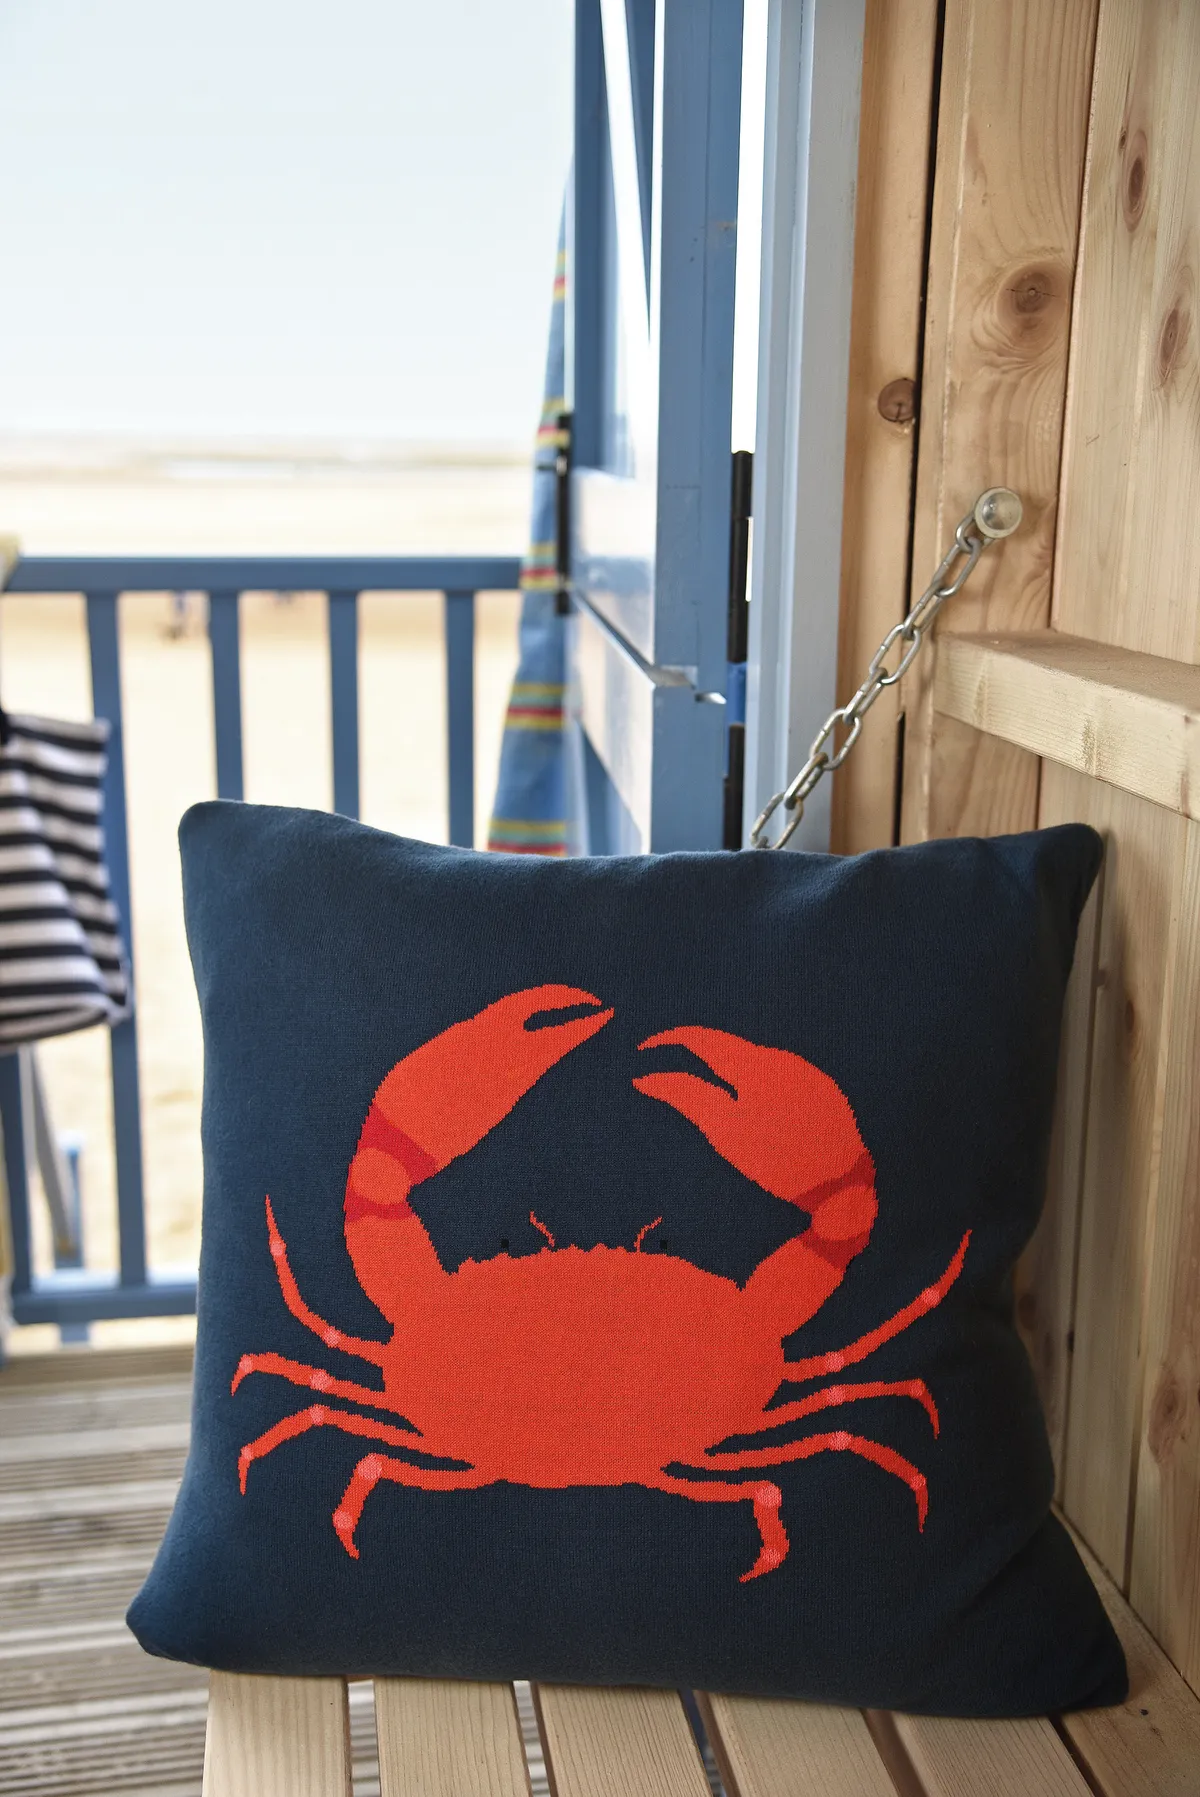 Crab knitted cushion, £49, Sophie Allport